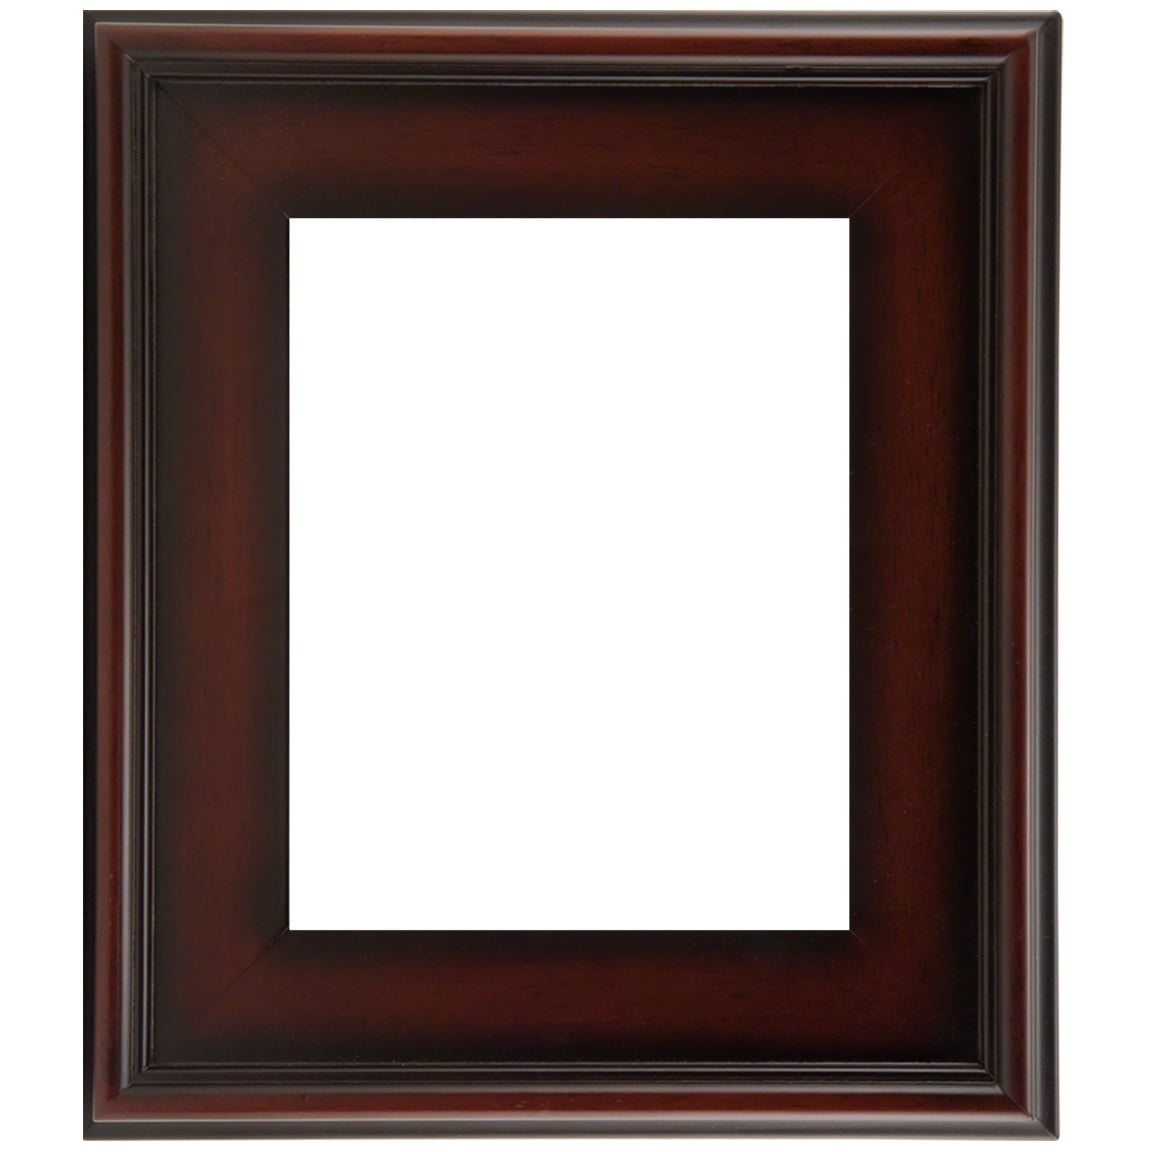 6"x6" CLASSIC MODERN PICTURE PAINT FRAME PLEIN AIR WOOD GOLD LEAF 3" WIDE 6x6" 